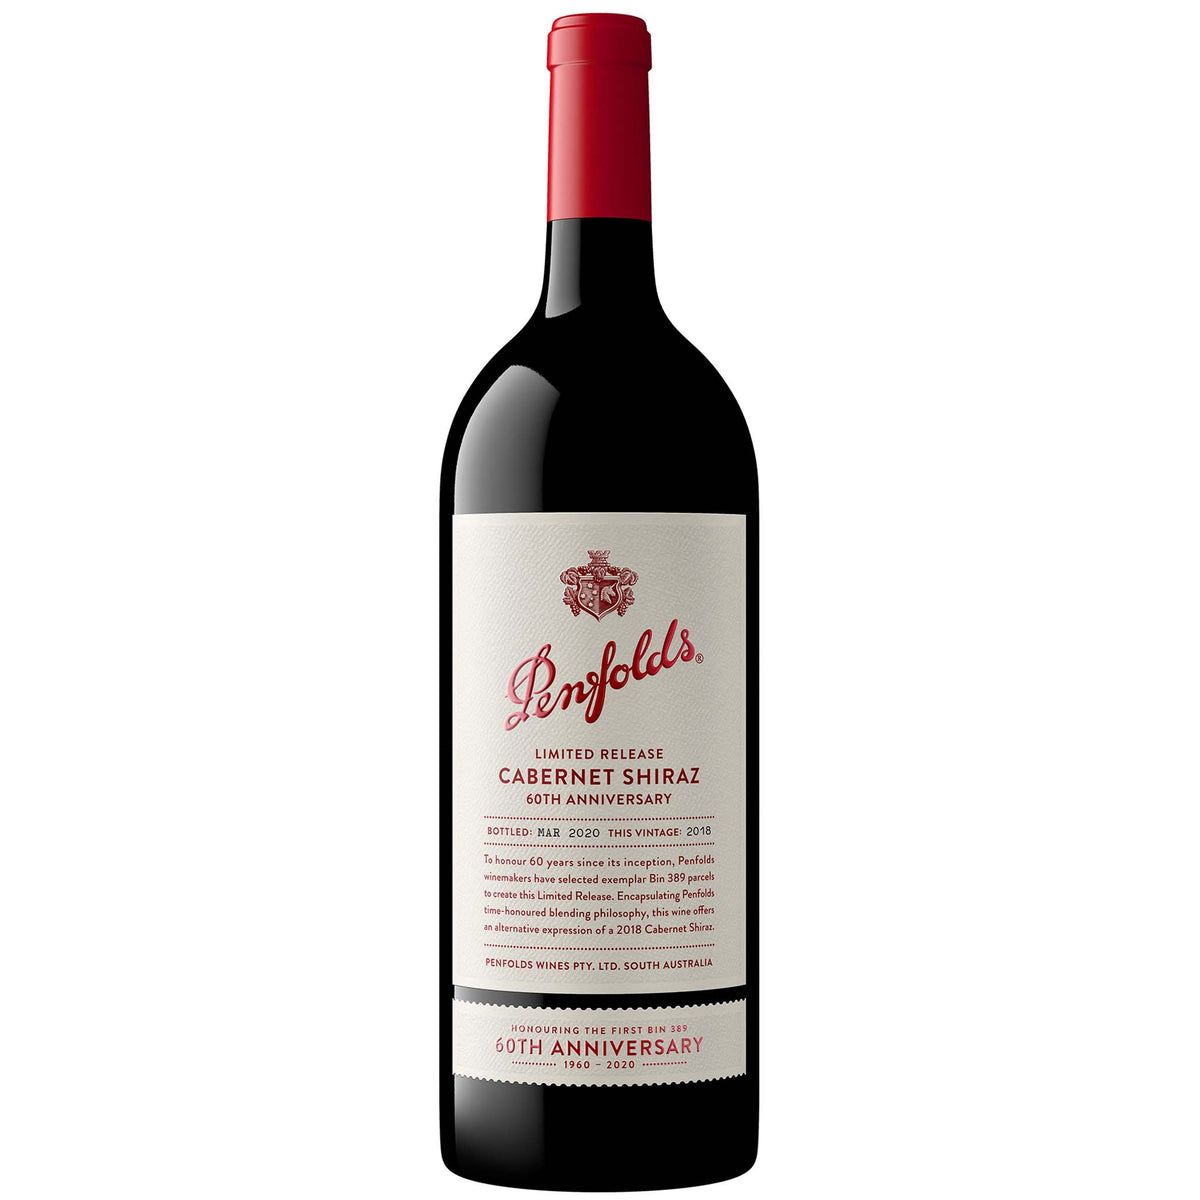 Penfolds-60th-Anniversary-Limited-Release-Cabernet-Shiraz-2018-1500ml